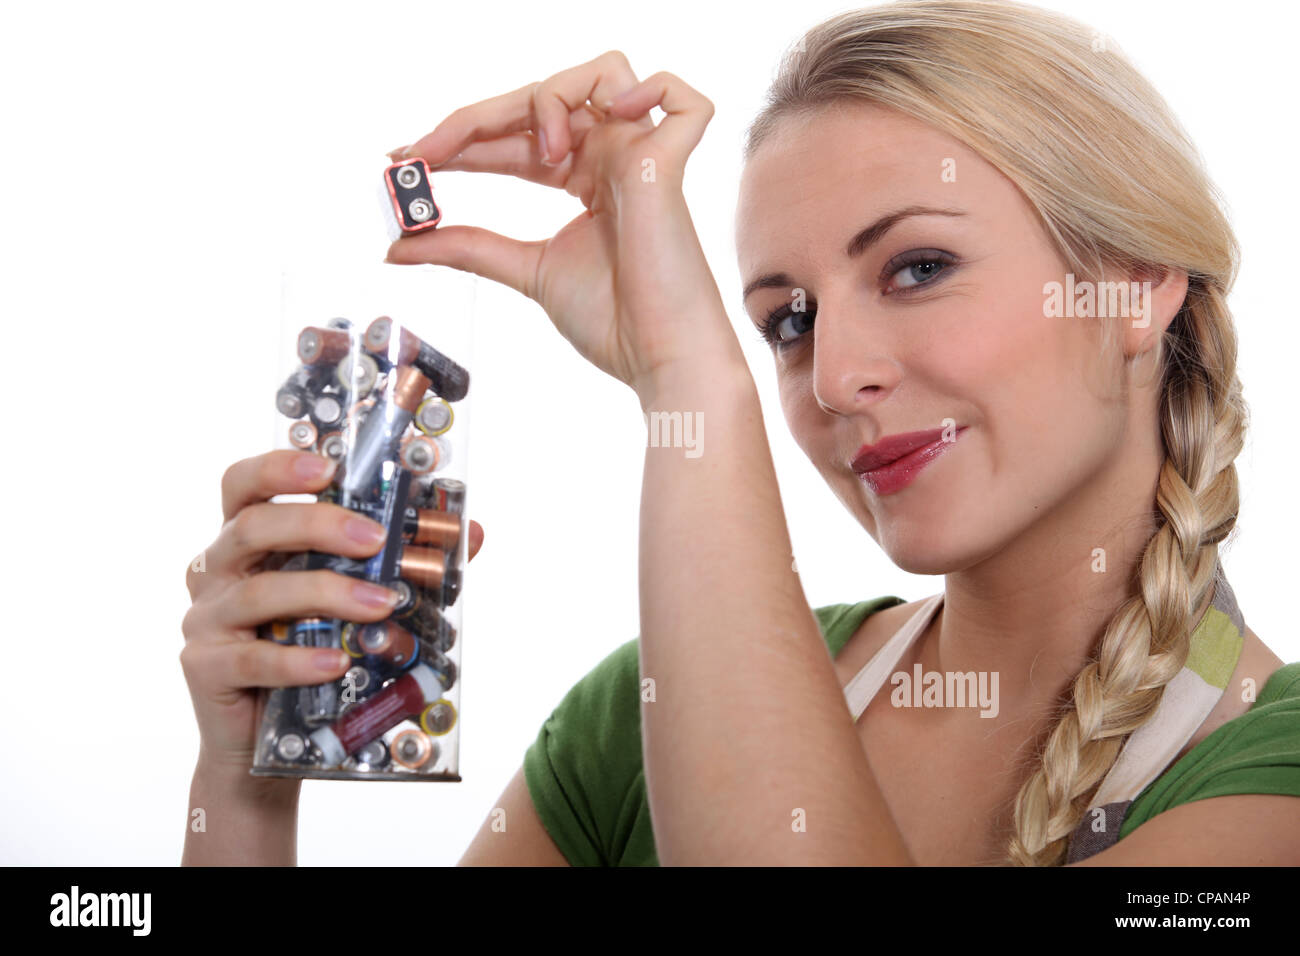 Blond woman recycling used batteries Stock Photo